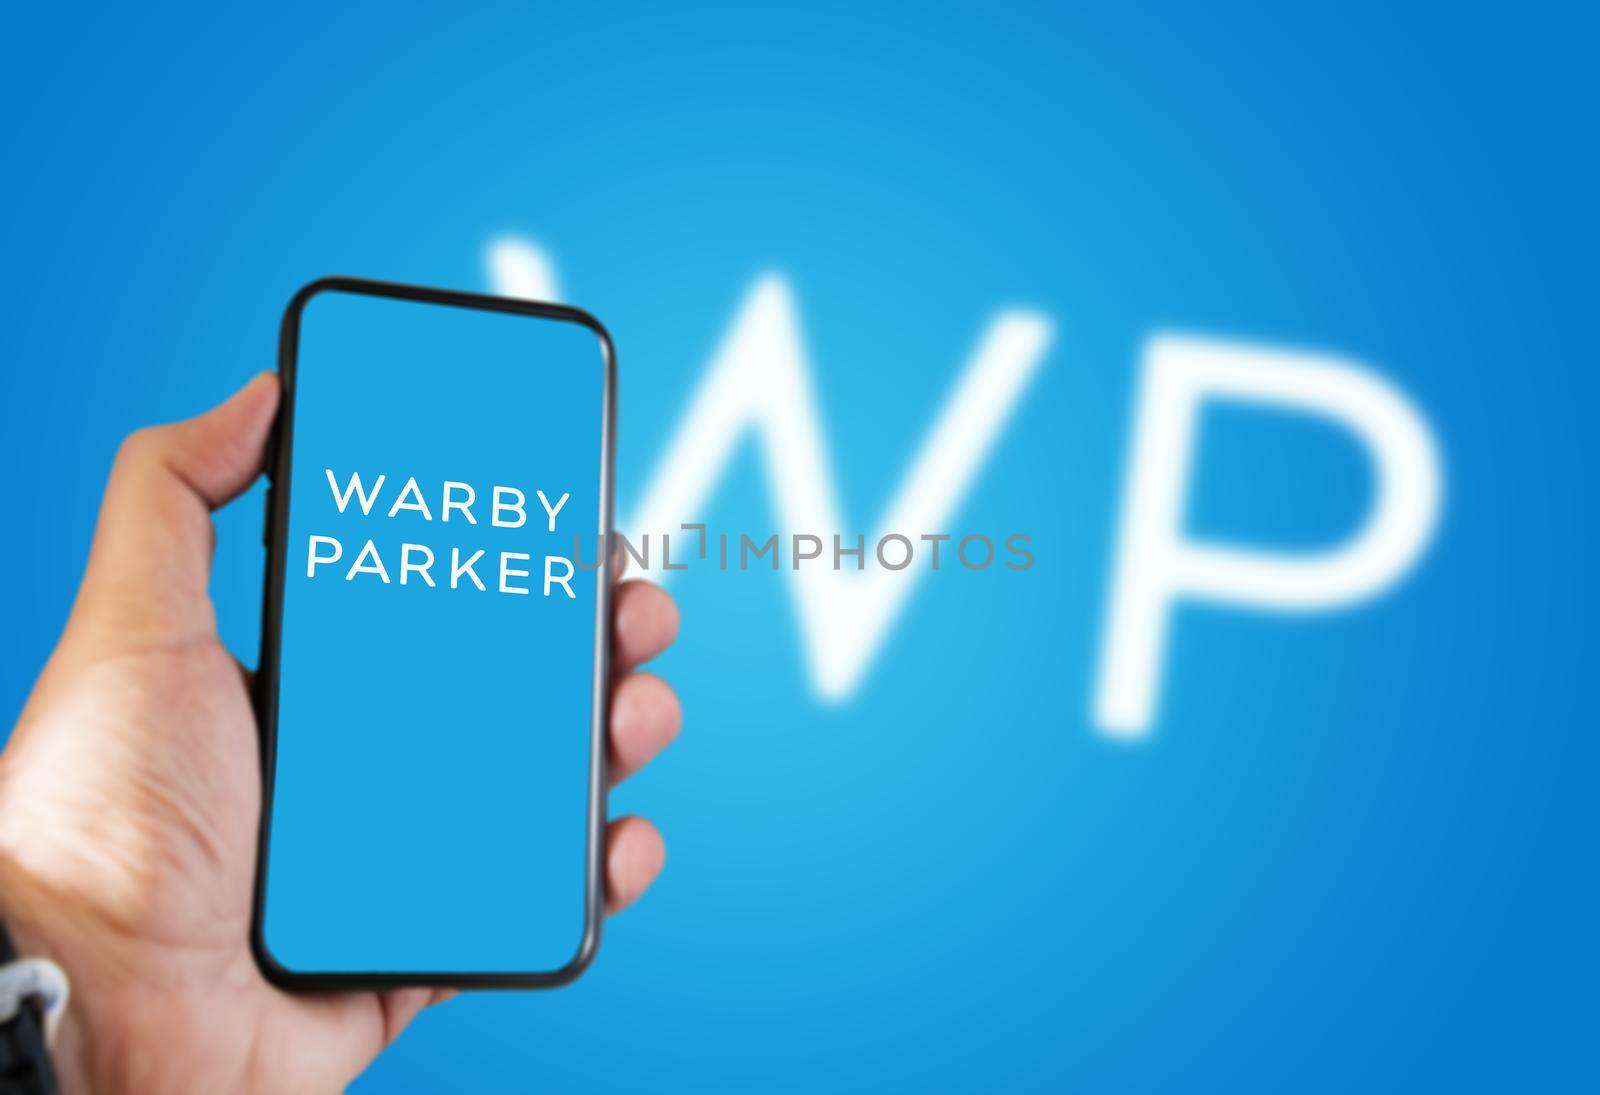 New York, USA, September 2021: hand holding a phone with the Warby Parker mobile app on the screen and the logo blurred on a blue background. Warby Parker is an American online retailer of eyeglasses